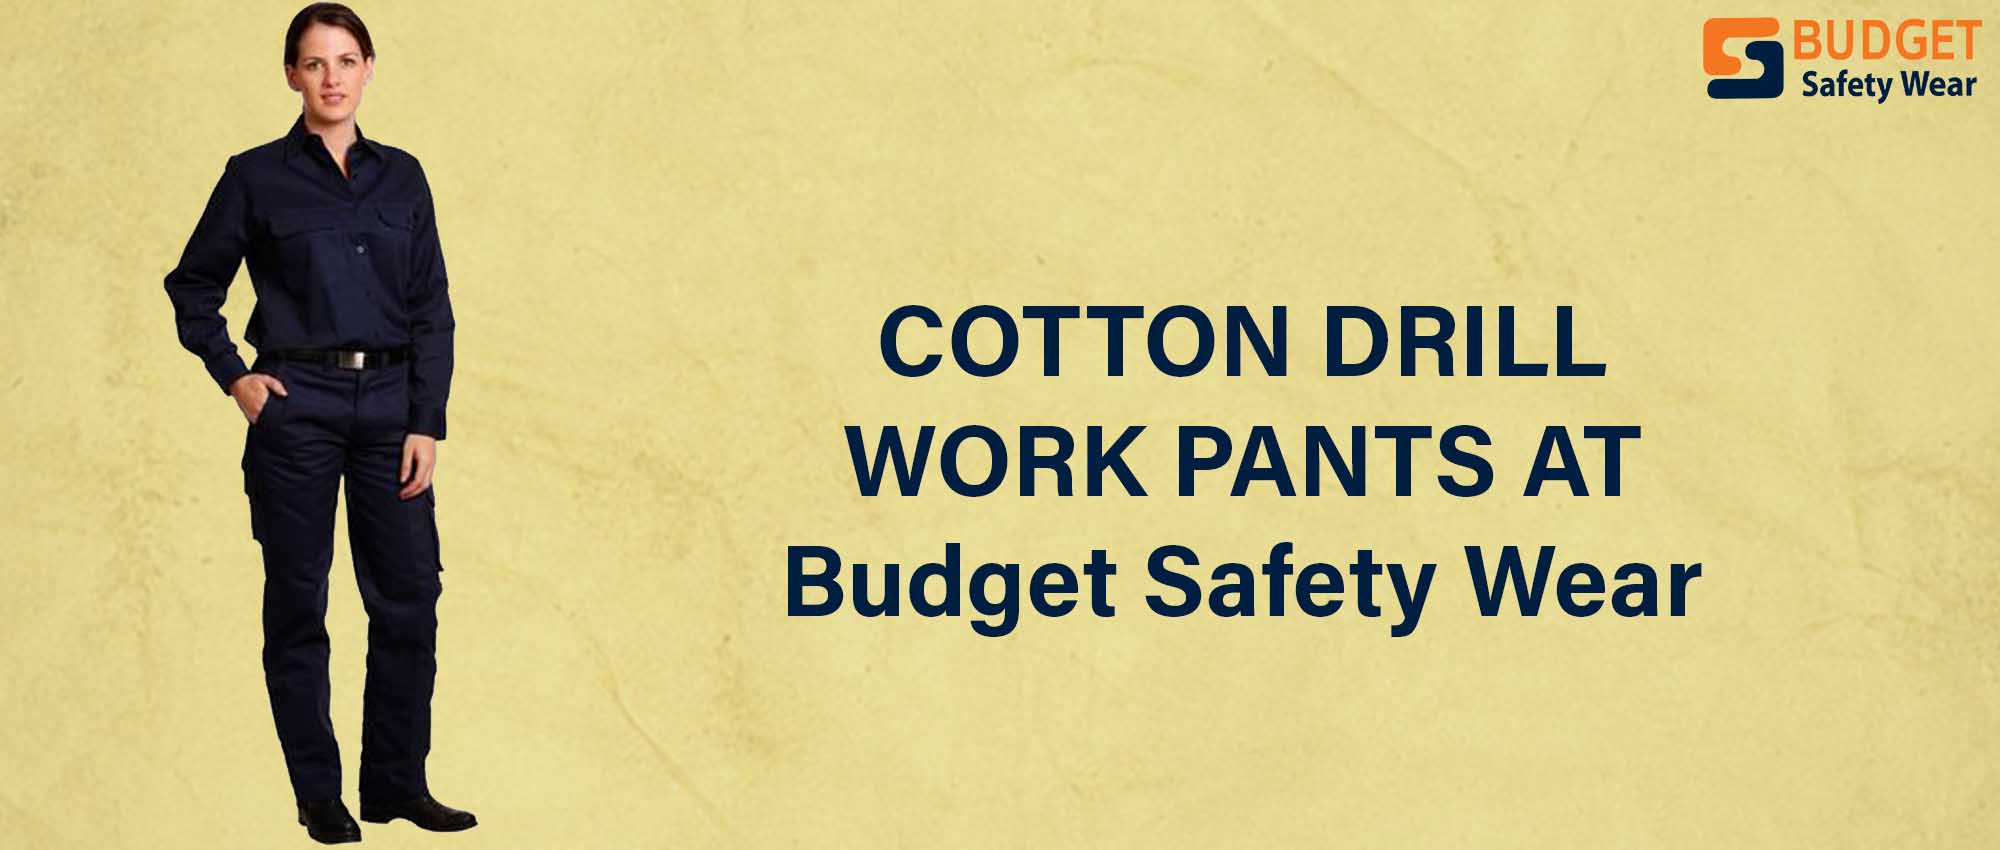 Cotton Drill Work Pants at Budget Safety Wear – Budget Safetywear